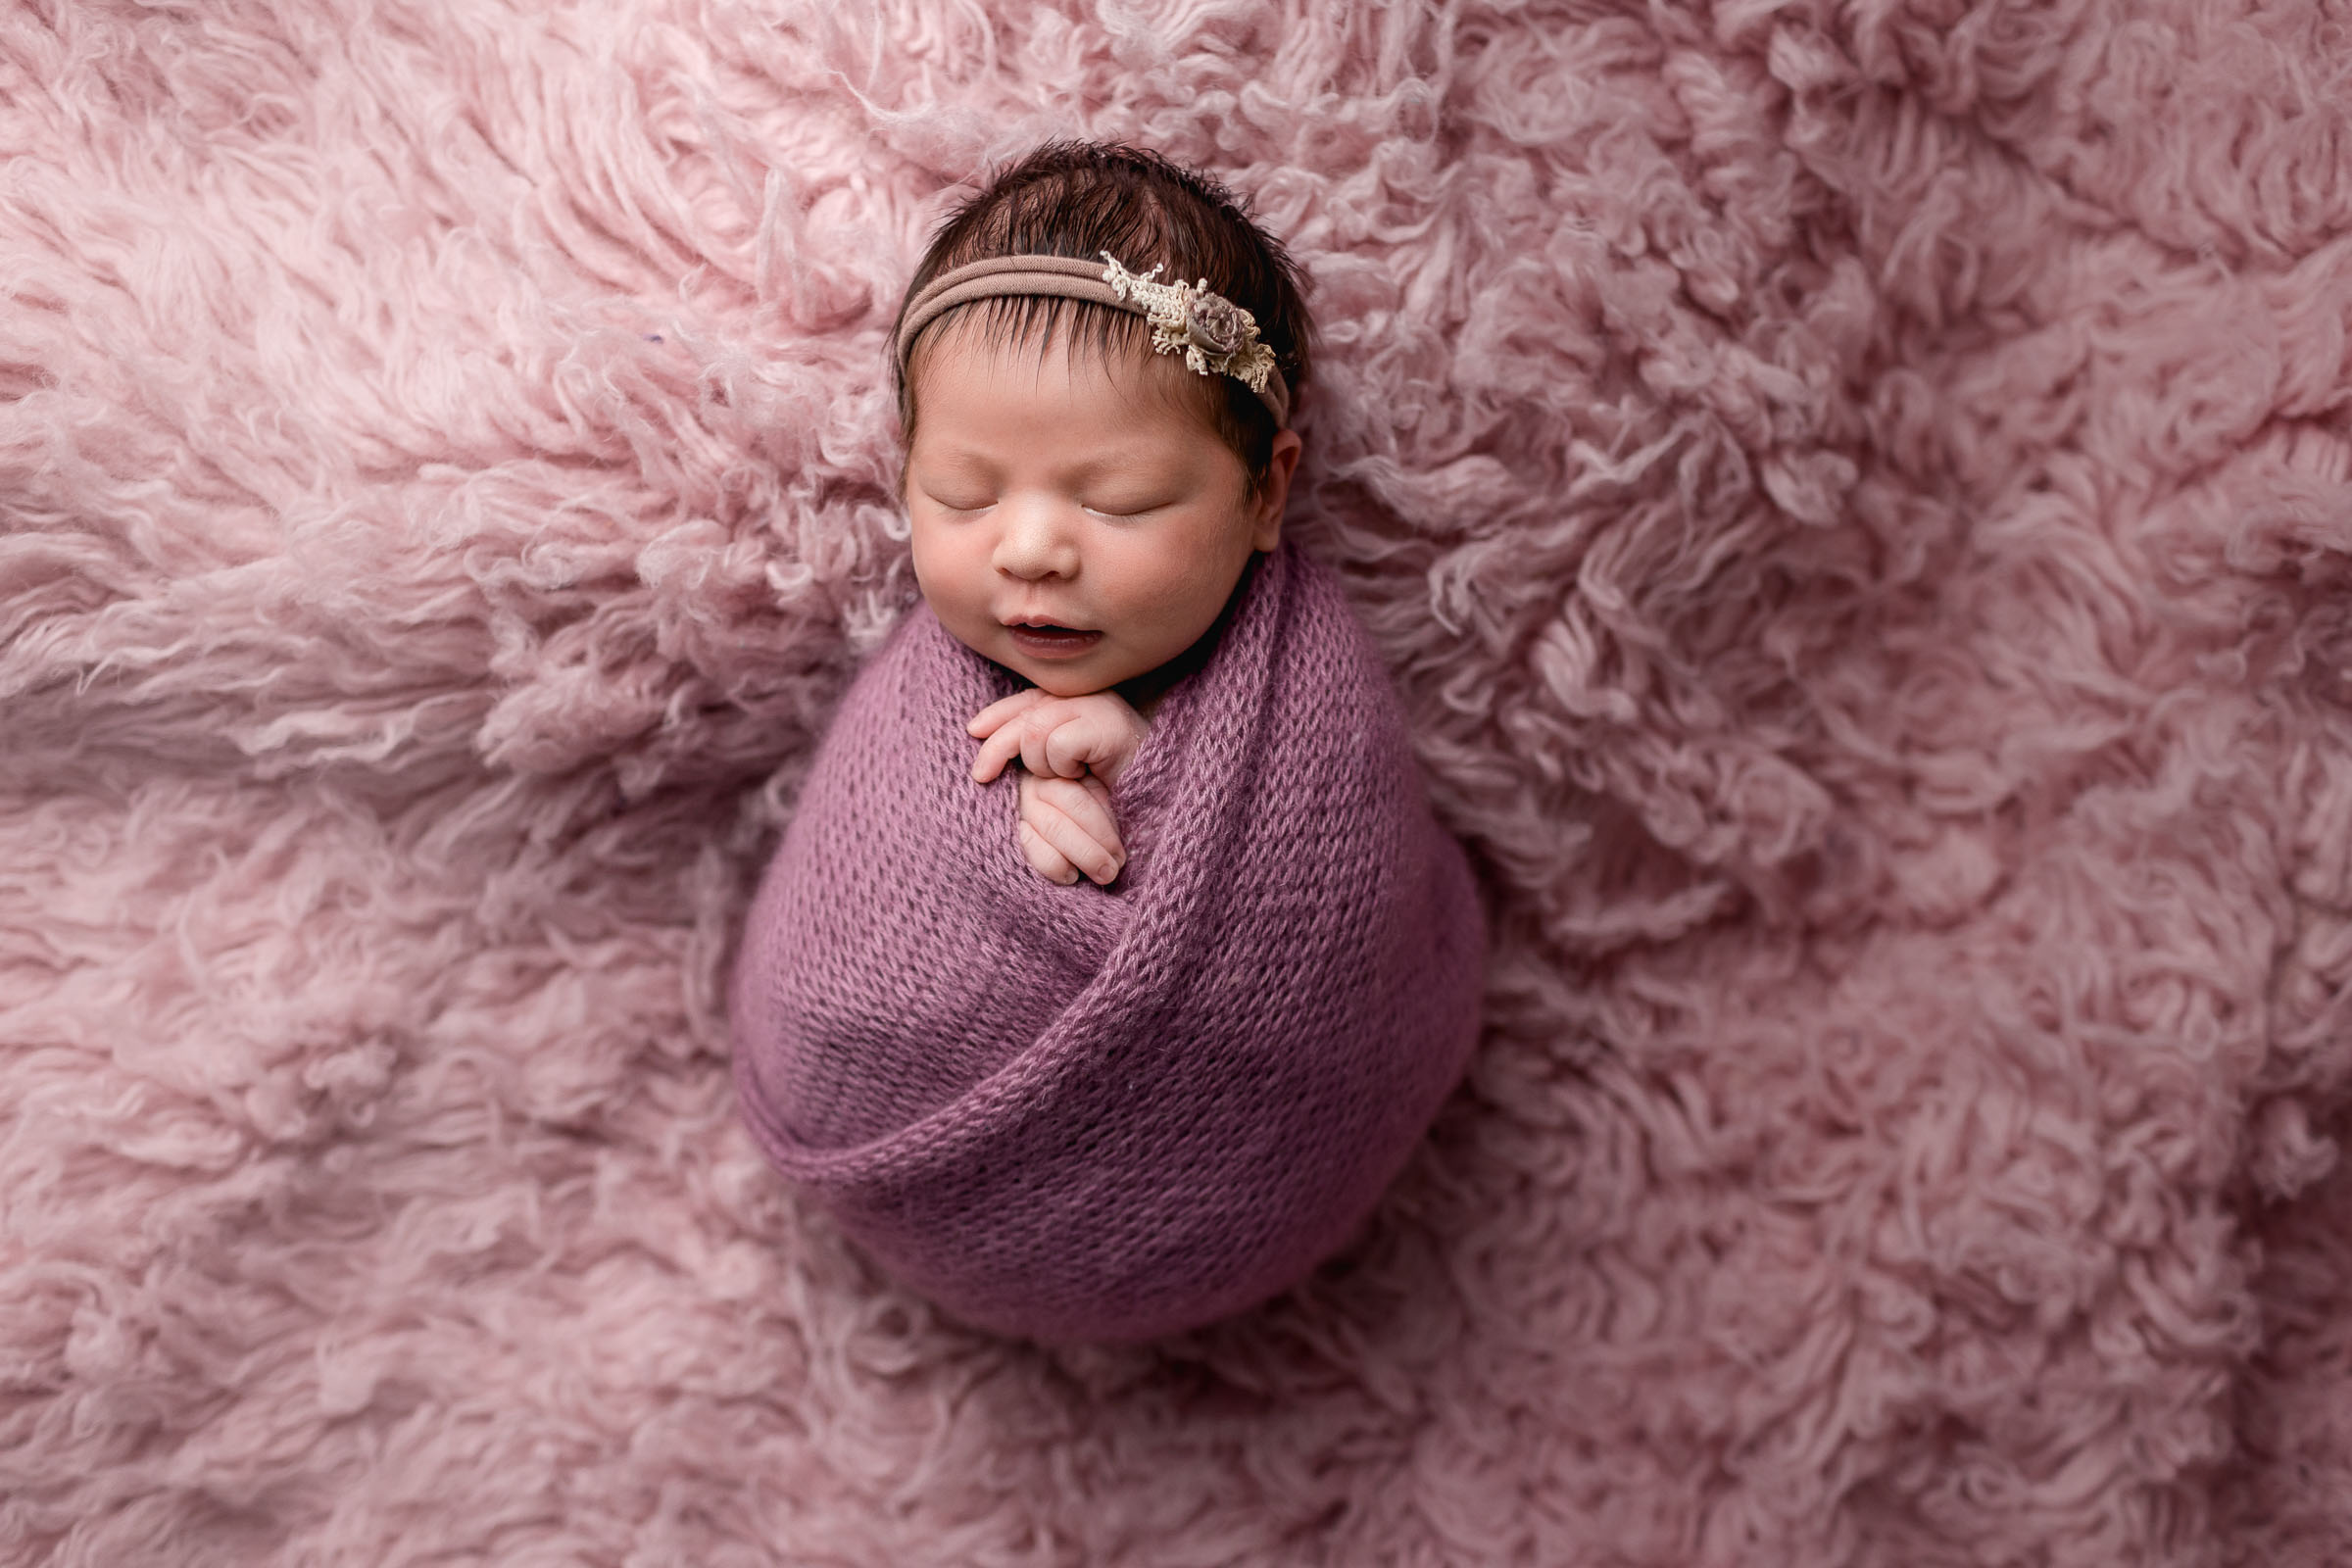 An all pink setup with newborn baby girl wrapped in pink